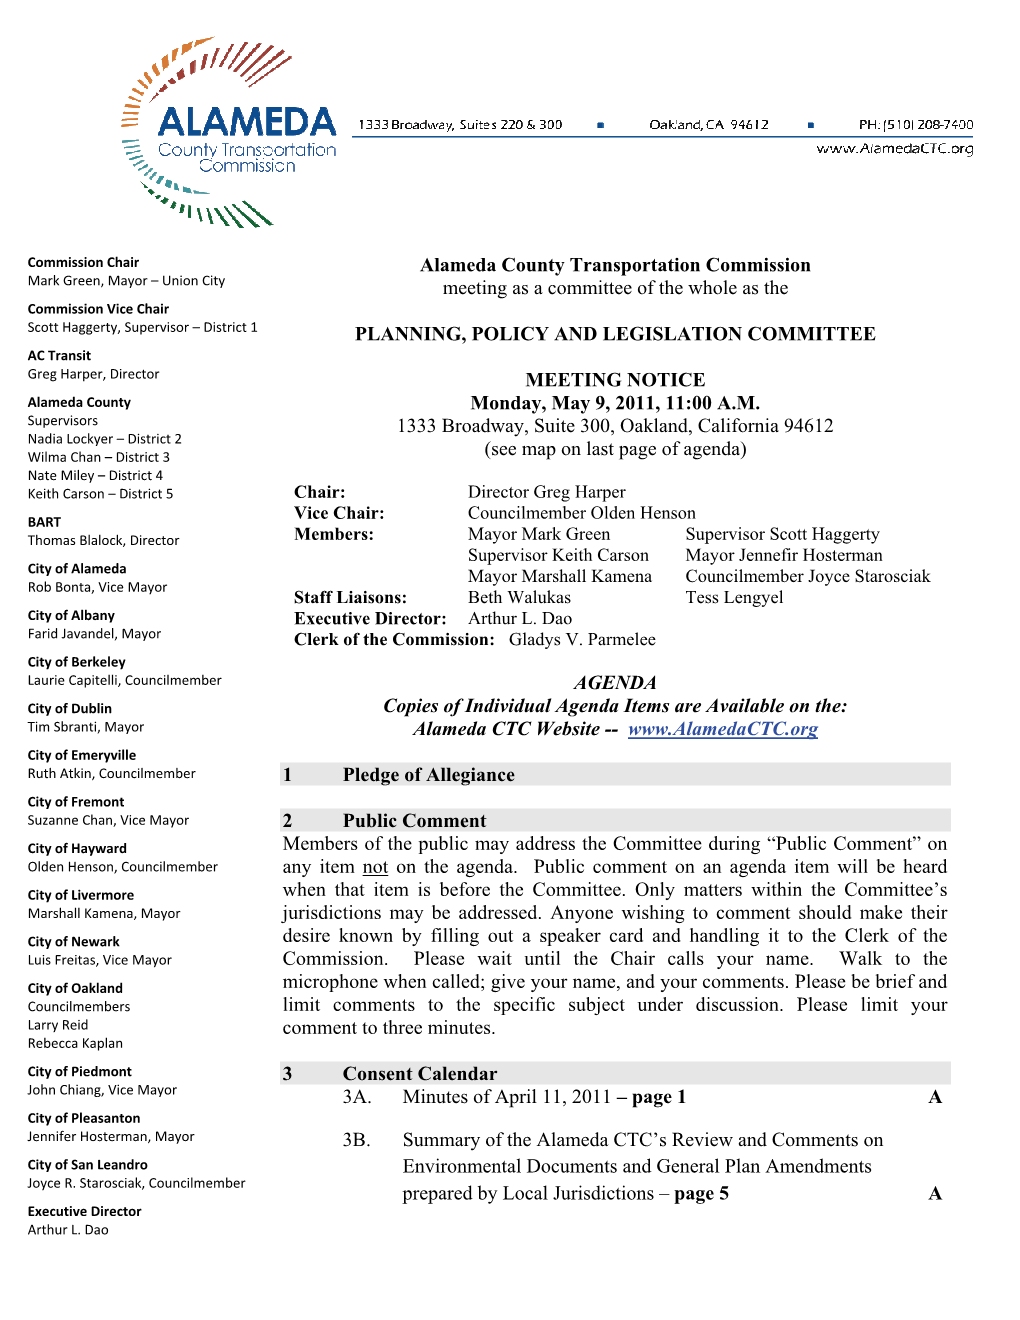 Plans and Programs Committee